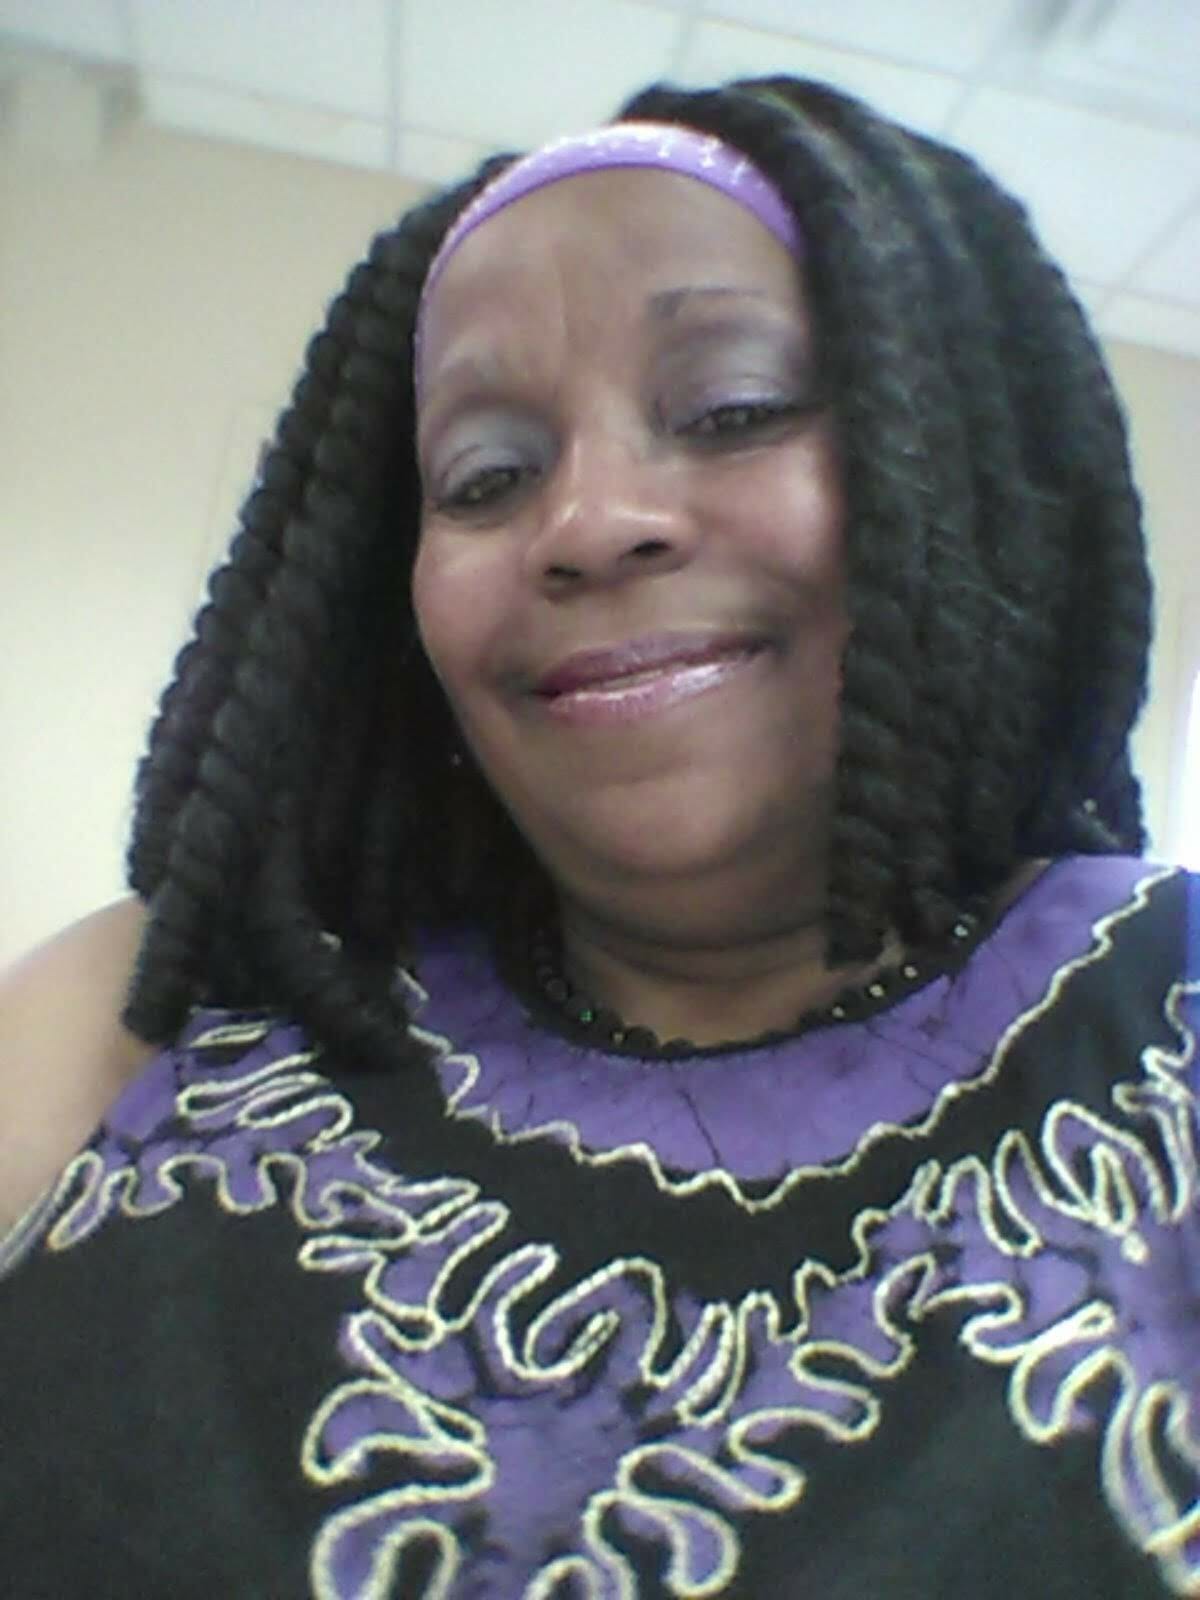 Ashro Woman of the Week, Tracey, a black woman with shoulder-length curly hair, in a black and lavender top.